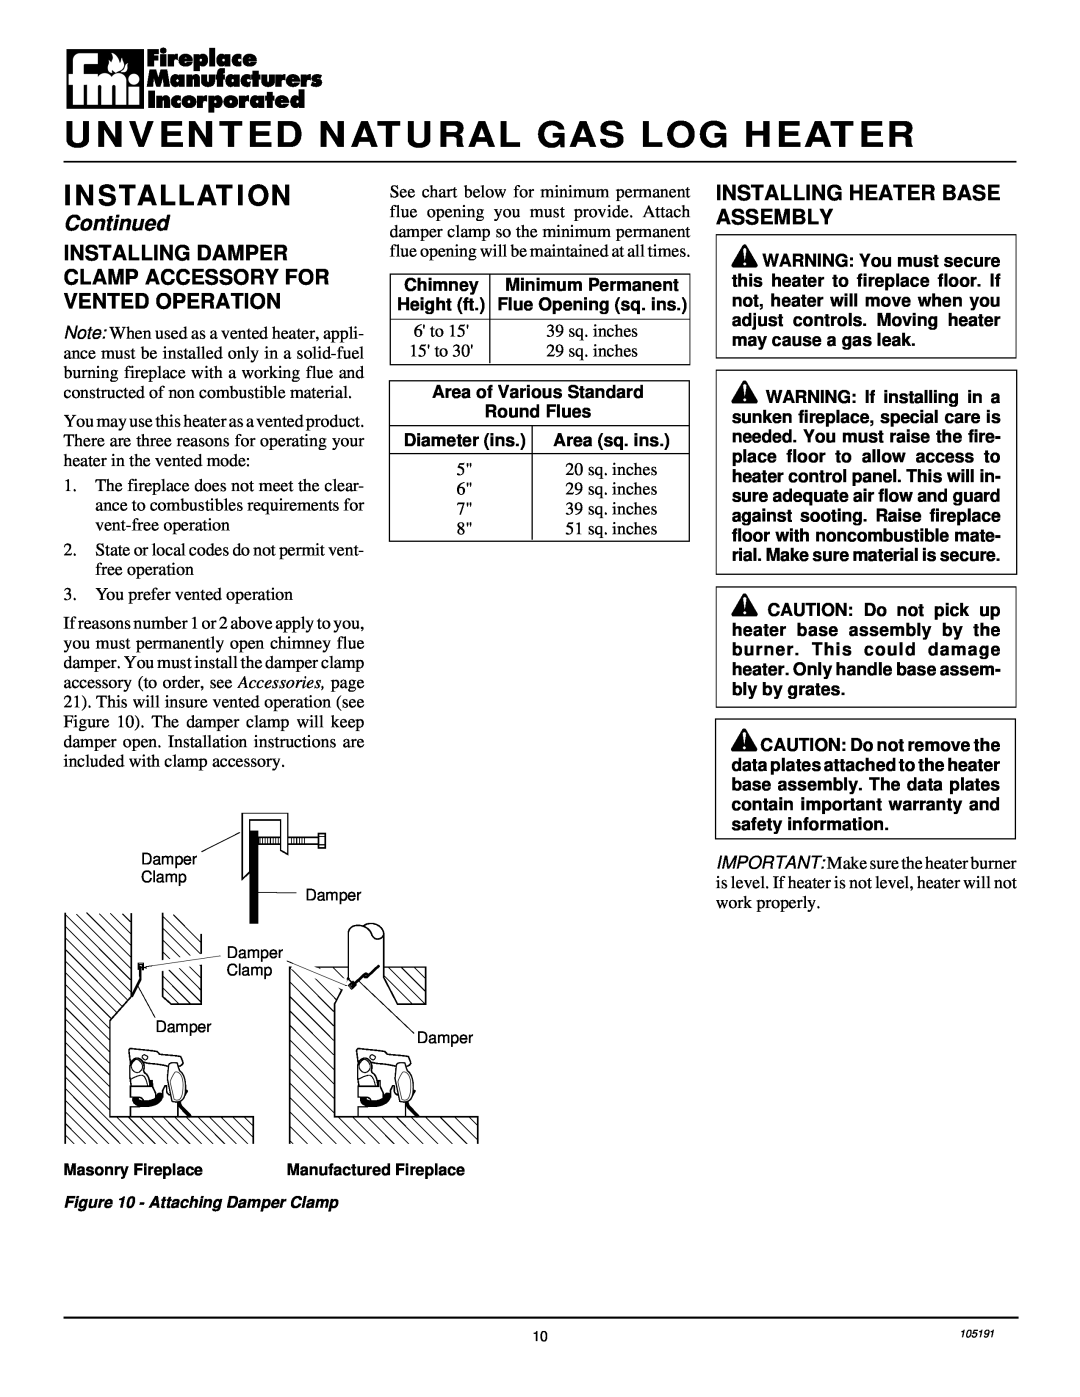 Desa FVF30N installation manual Installing Heater Base Assembly, Unvented Natural Gas Log Heater, Installation, Continued 